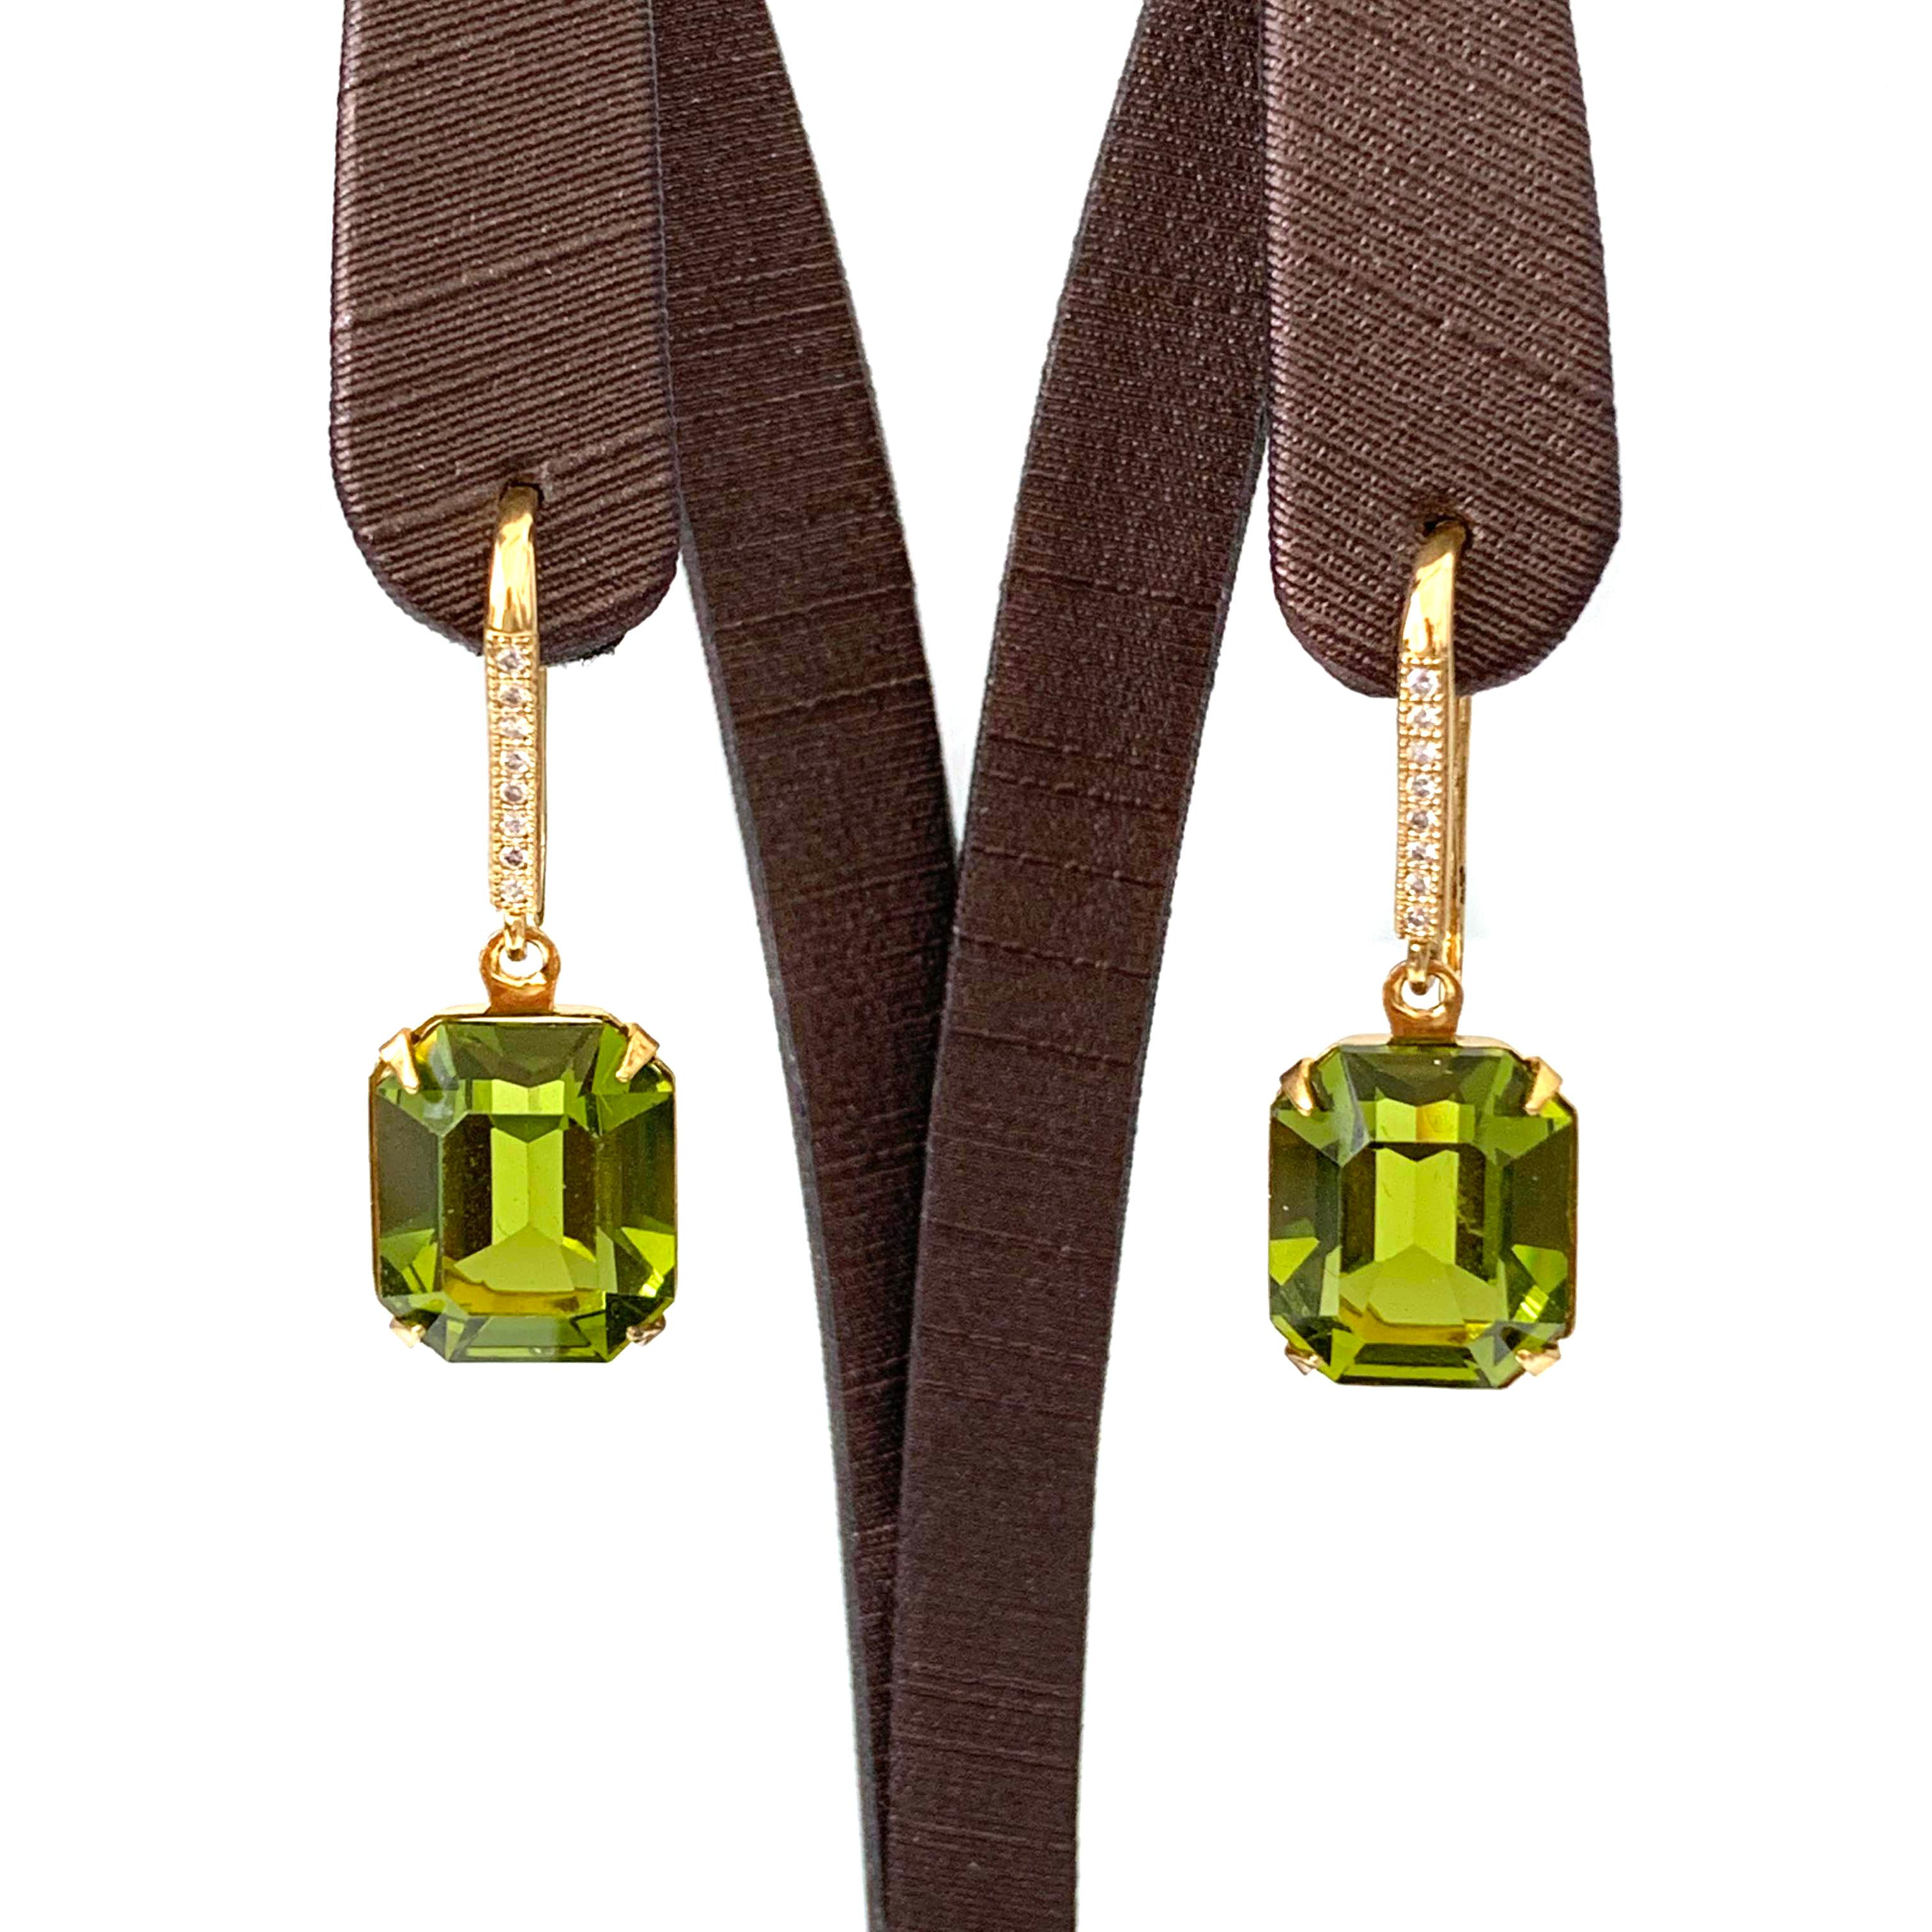 Octagon Olivine emerald Swarovski Crystal on micropave vermeil hook earrings

The earrings feature 2 beautiful 10x12mm octagon-shape olivine emerald Swarovski crystal, and micropave round simulated diamond 18k gold vermeil over sterling silver